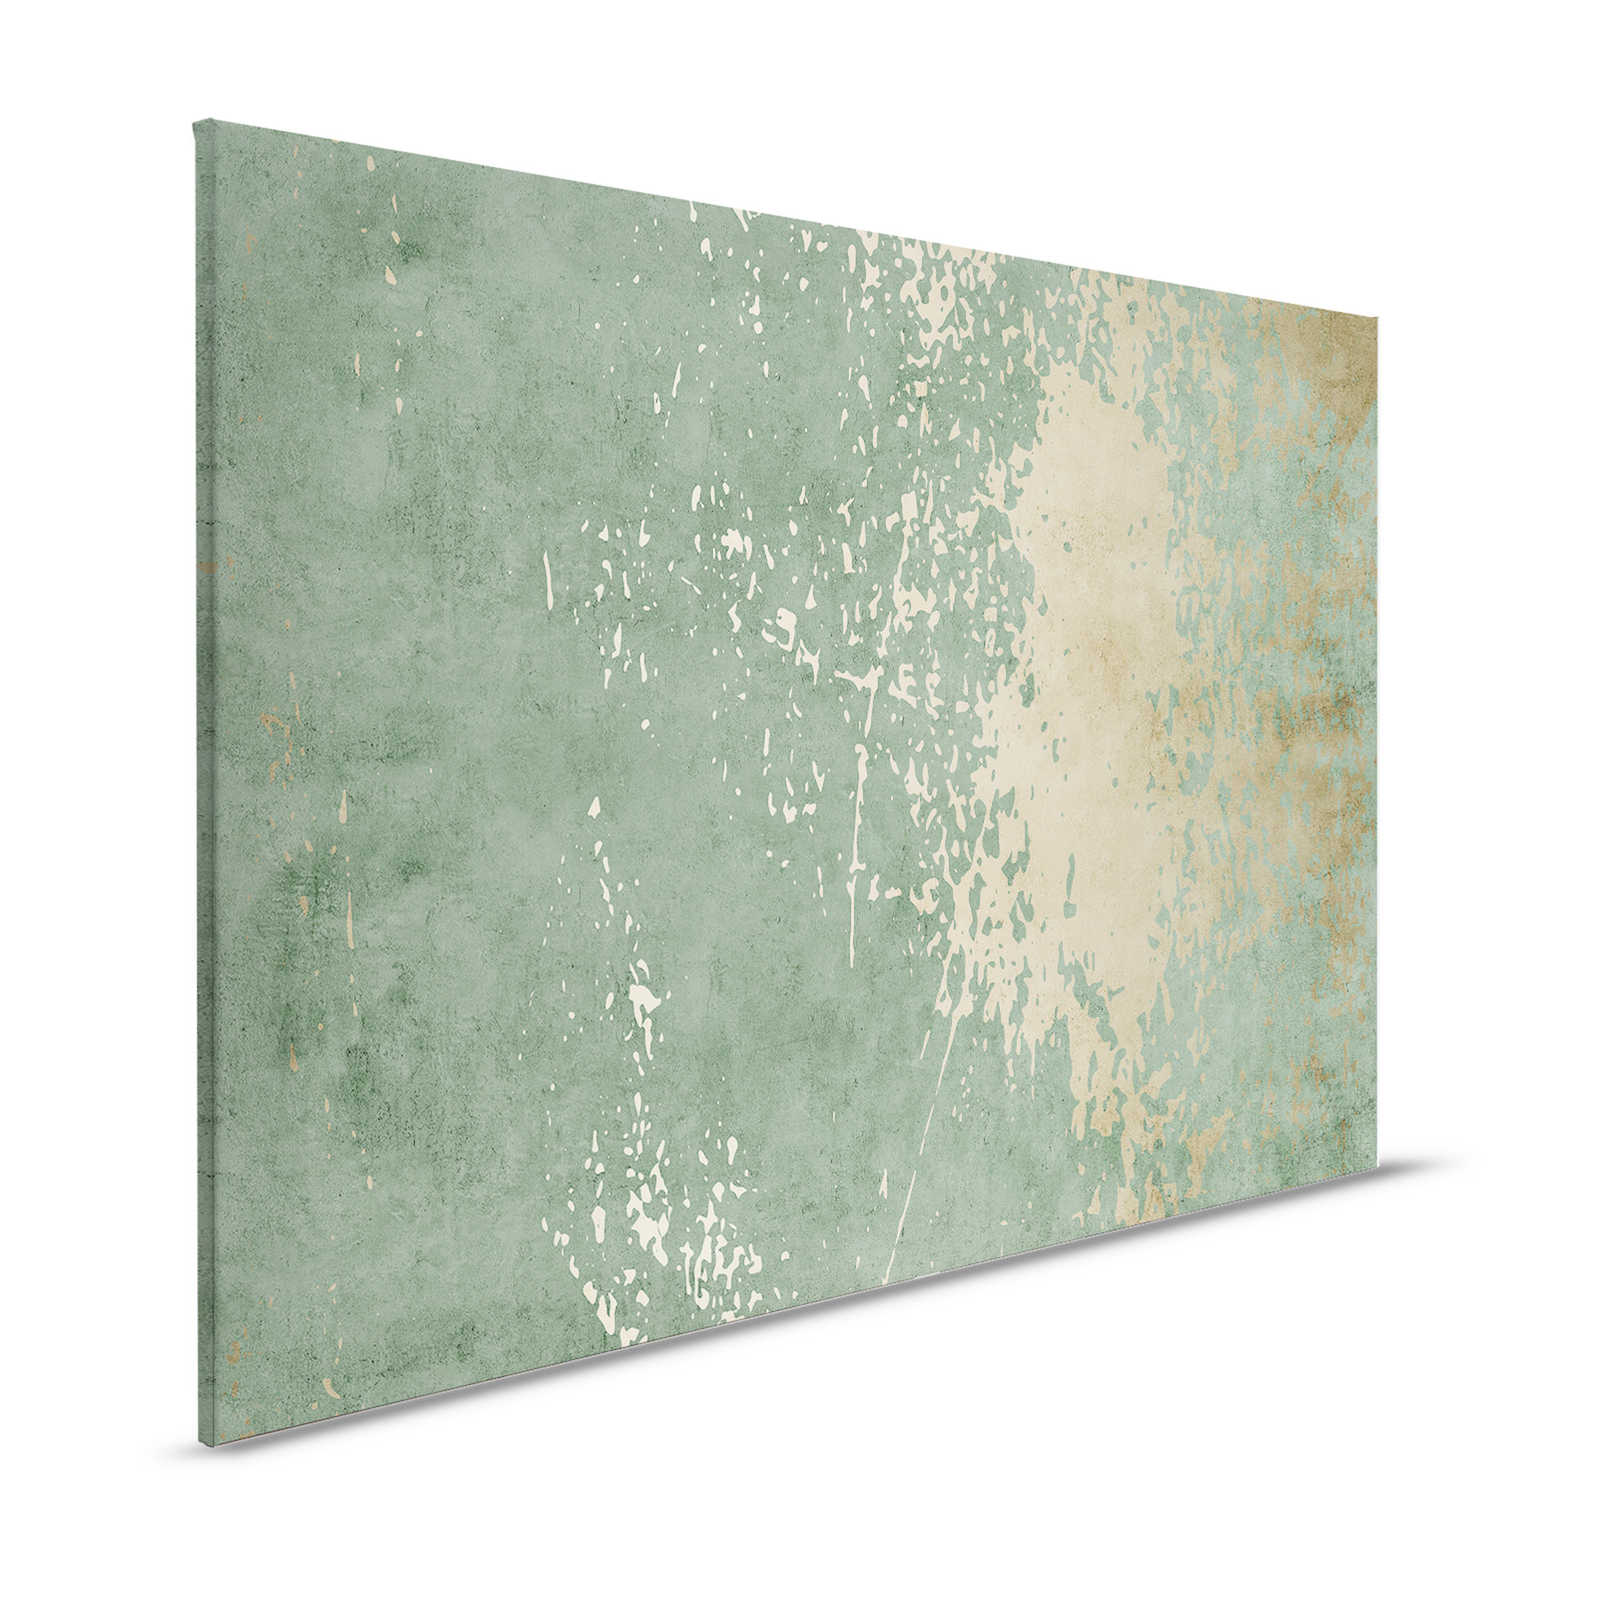 Vintage Wall 1 - Canvas painting sage green & gold plaster look in used look - 1.20 m x 0.80 m
